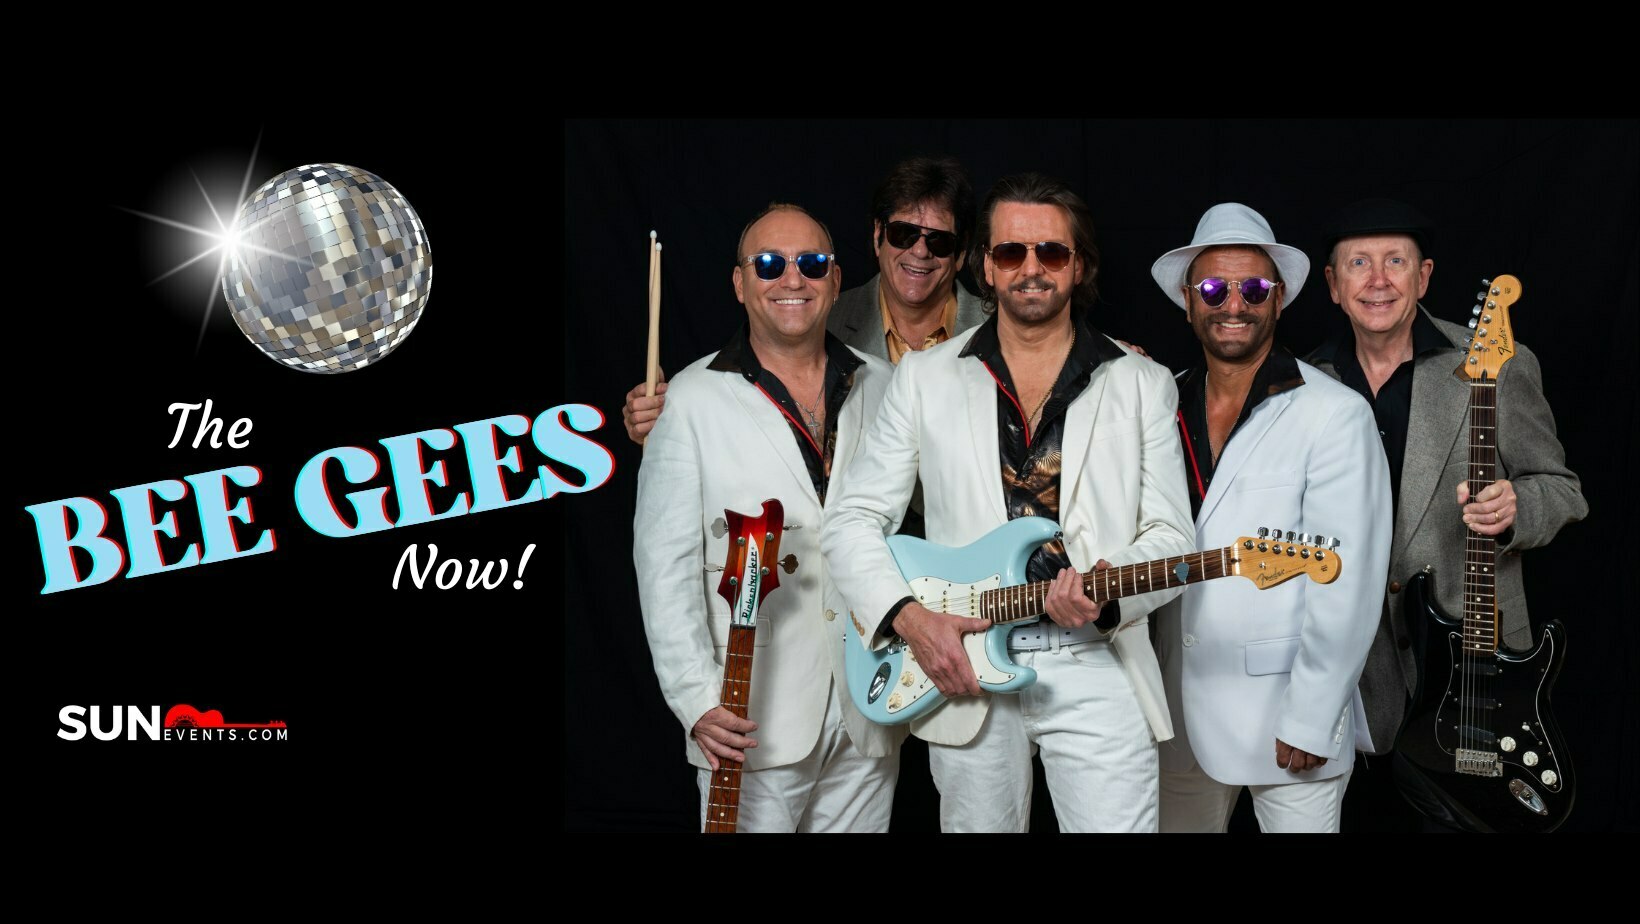 Bee Gees Now, Palm Beach Gardens, Florida, United States